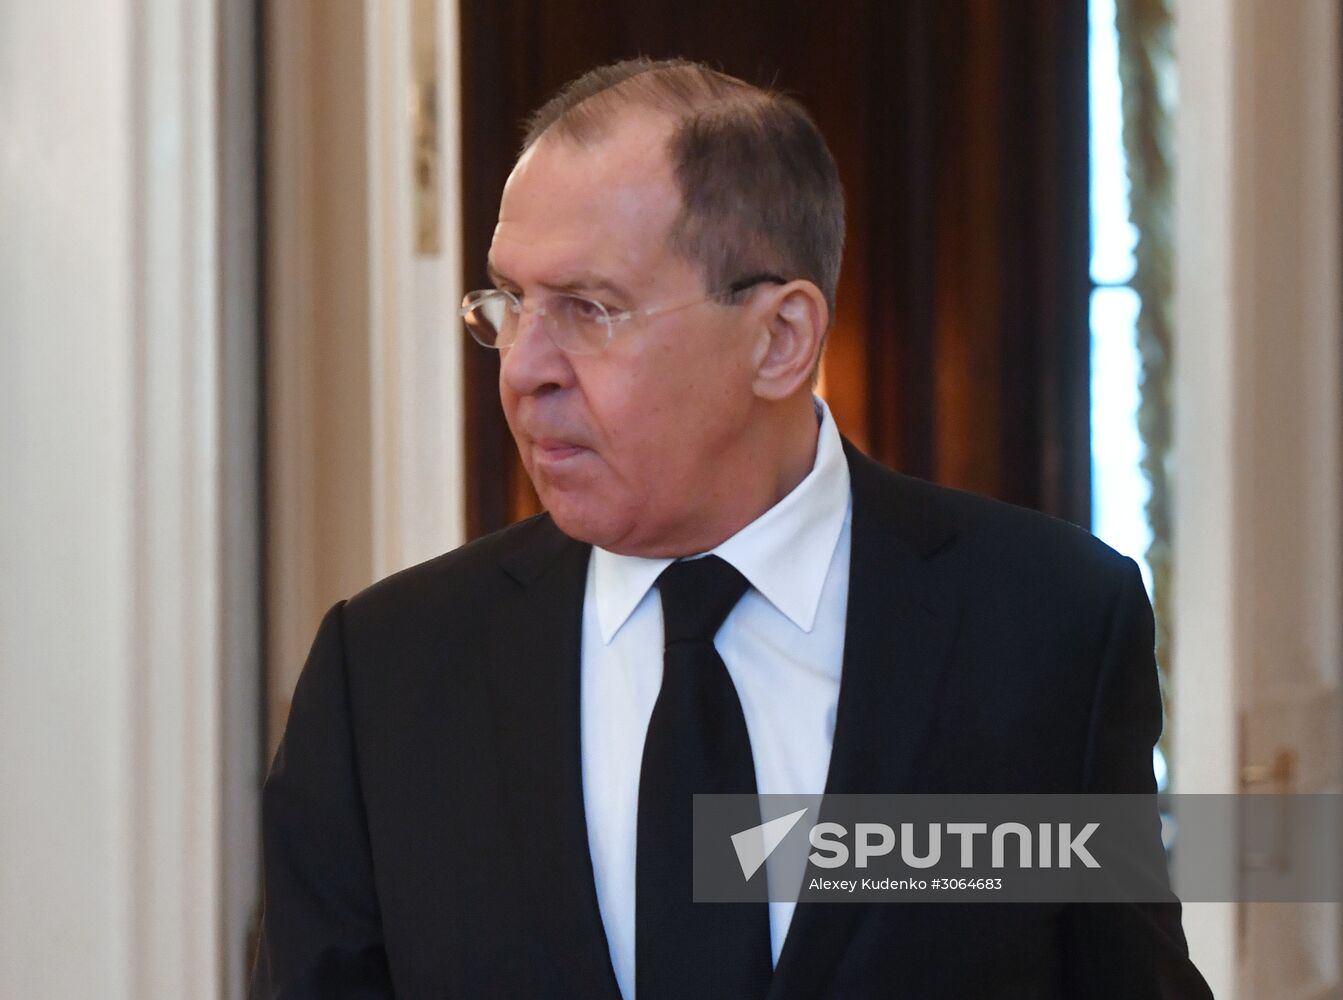 Foreign Minister Sergei Lavrov meets with Foreign Minister of Kyrgyzstan Erlan Abdyldaev